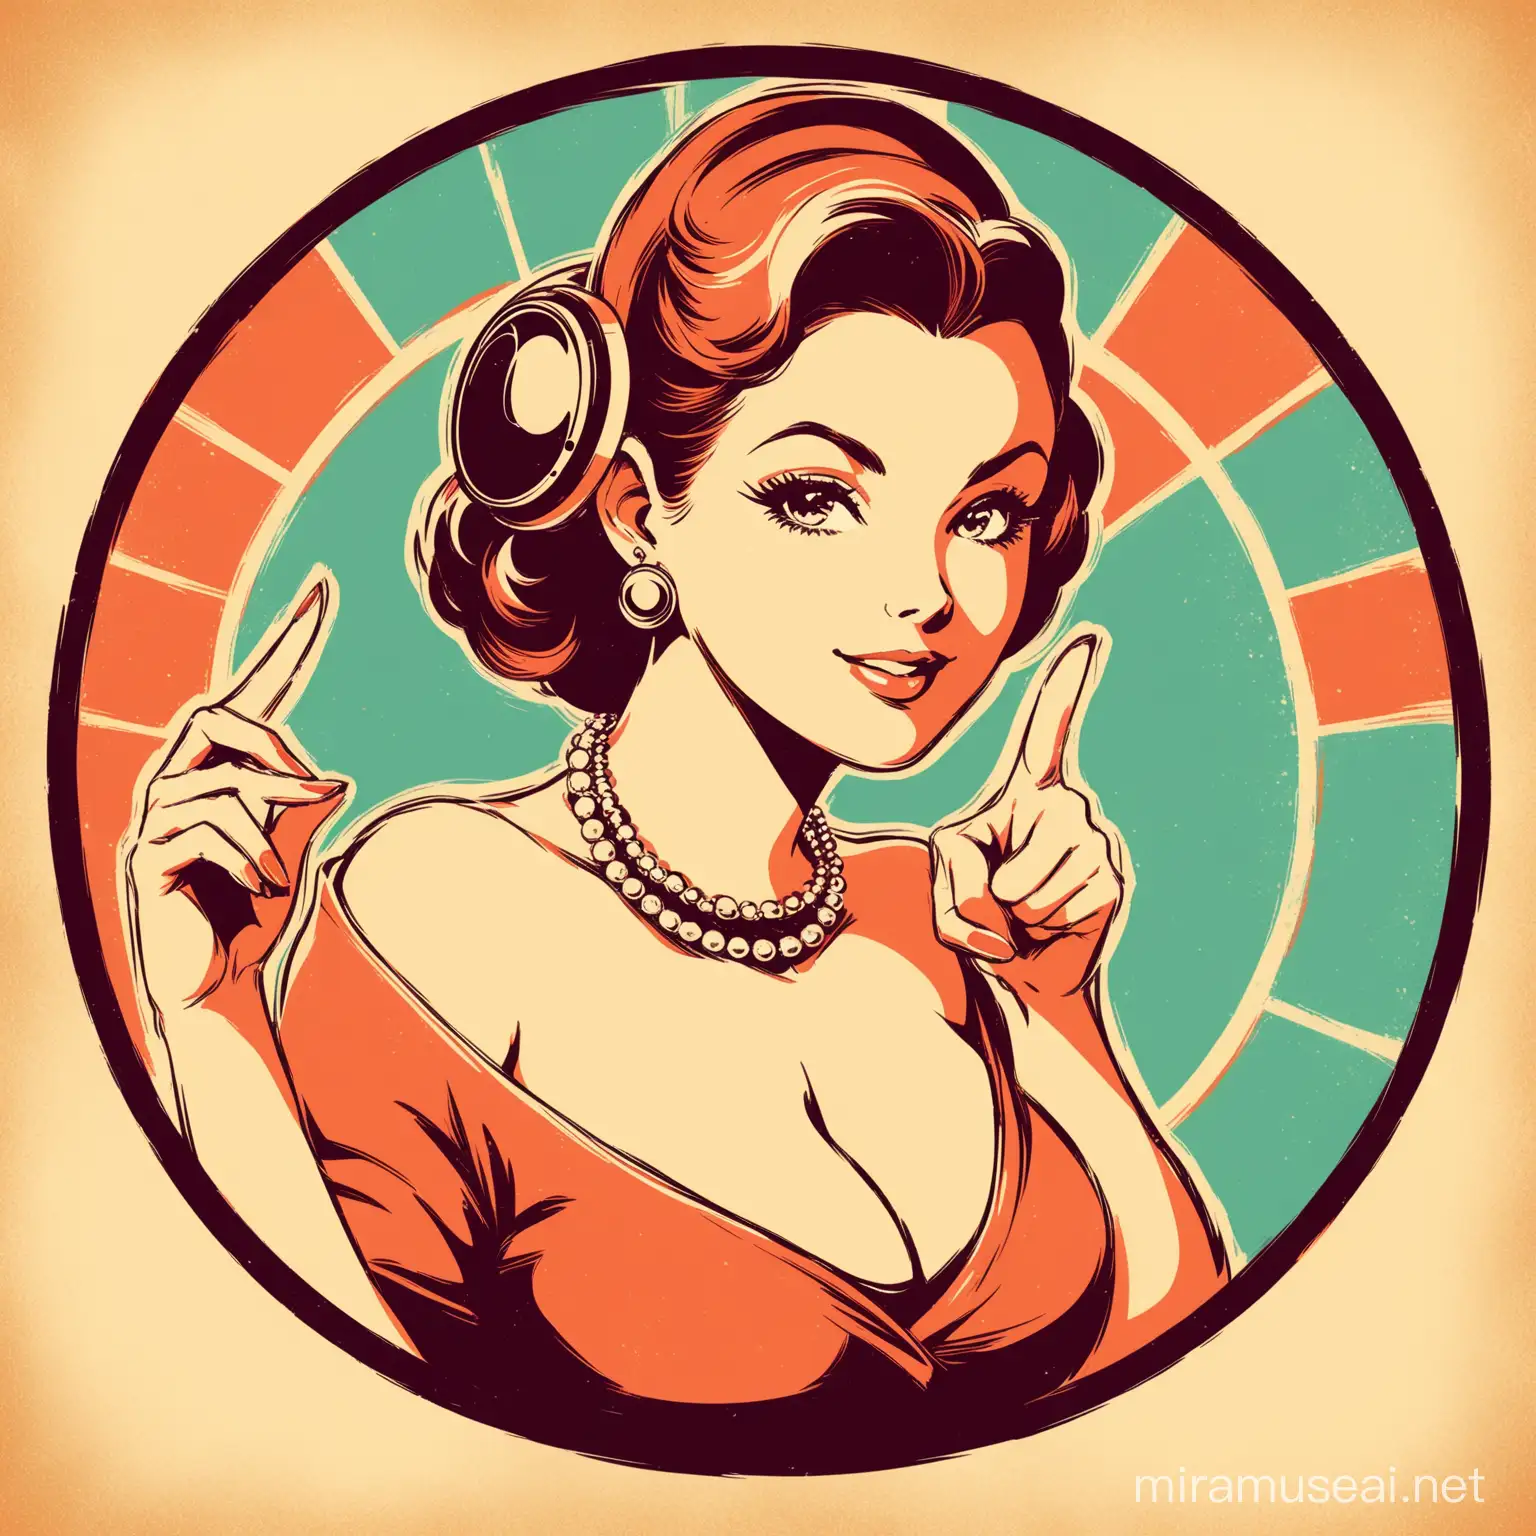 Retro poster design, retro colors. Pinup style. Very nice drawing, flat, 2d, vintage style. Vintage lady, Circle composition. Retro vinyl elements. Very elegant lady listening music . Pointing on you